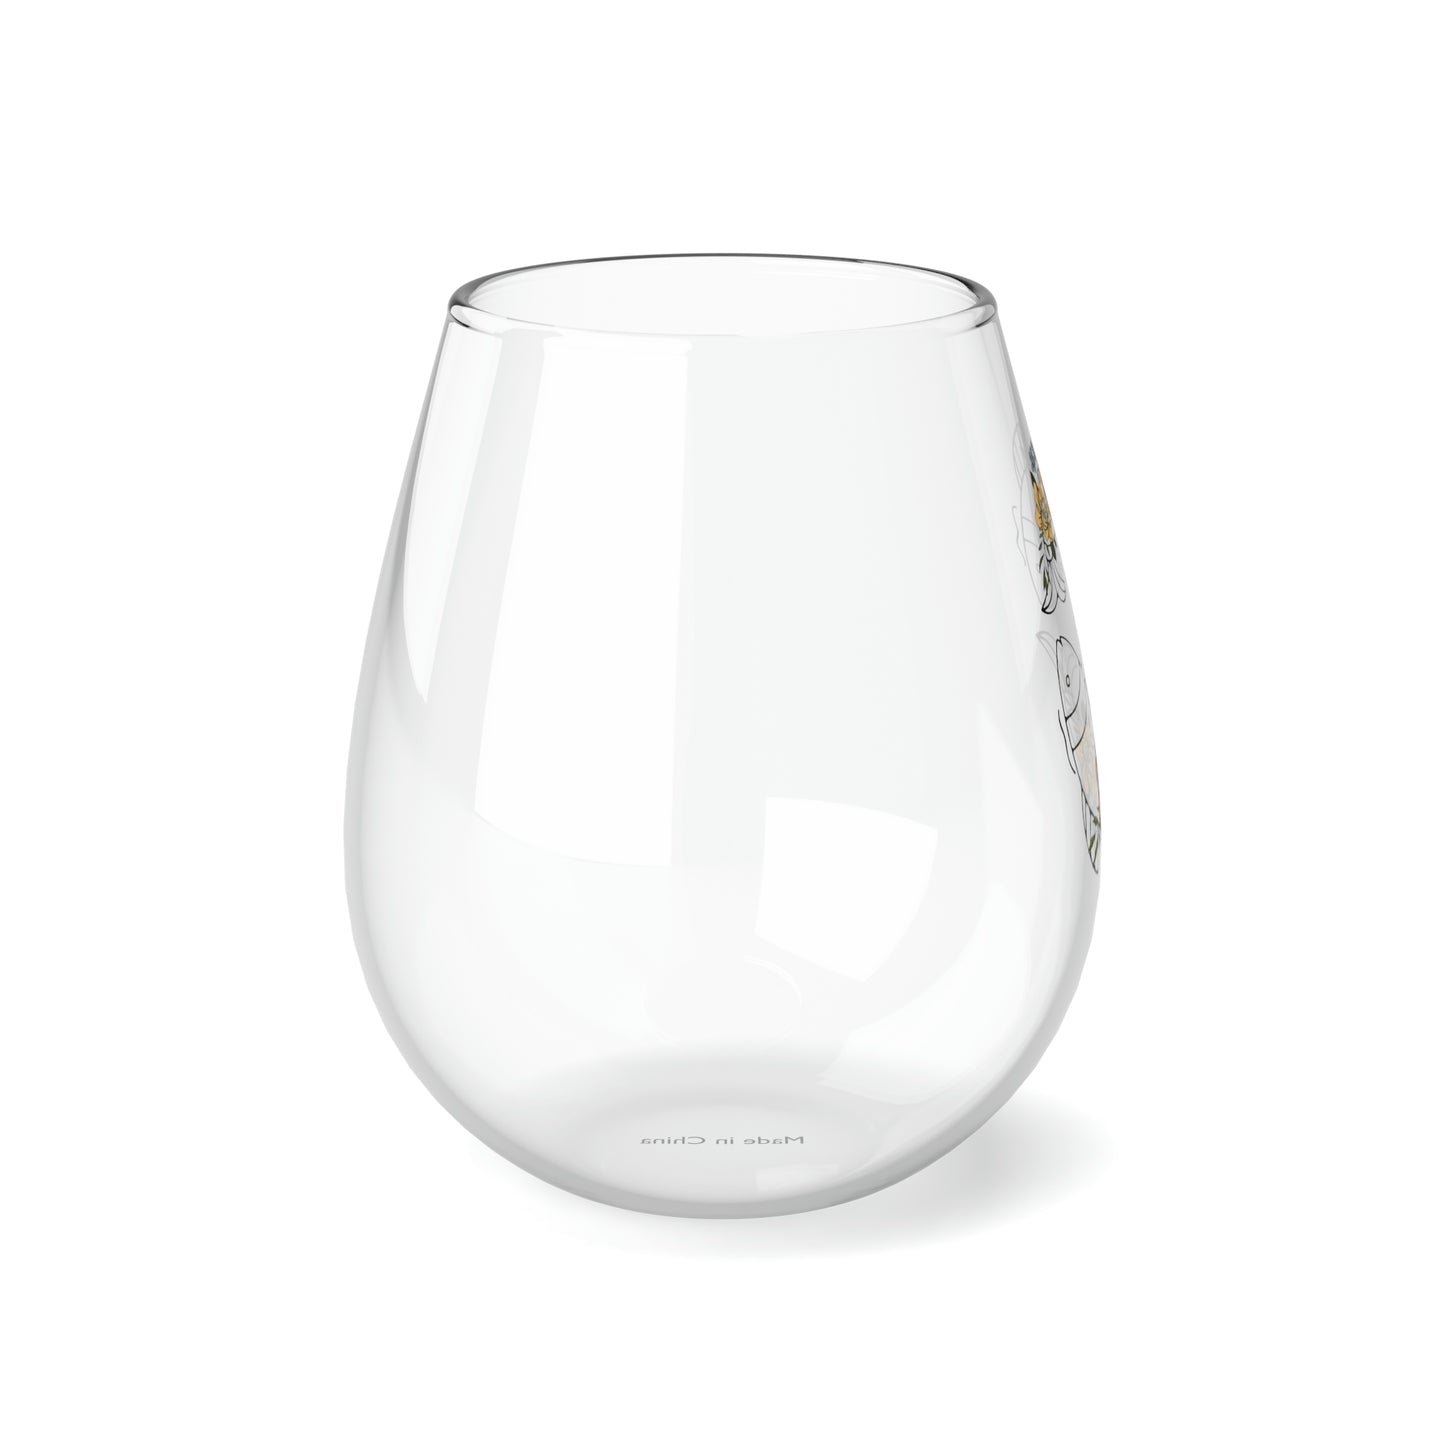 Pisces Flowers and Stars Stemless Wine Glass, 11.75oz